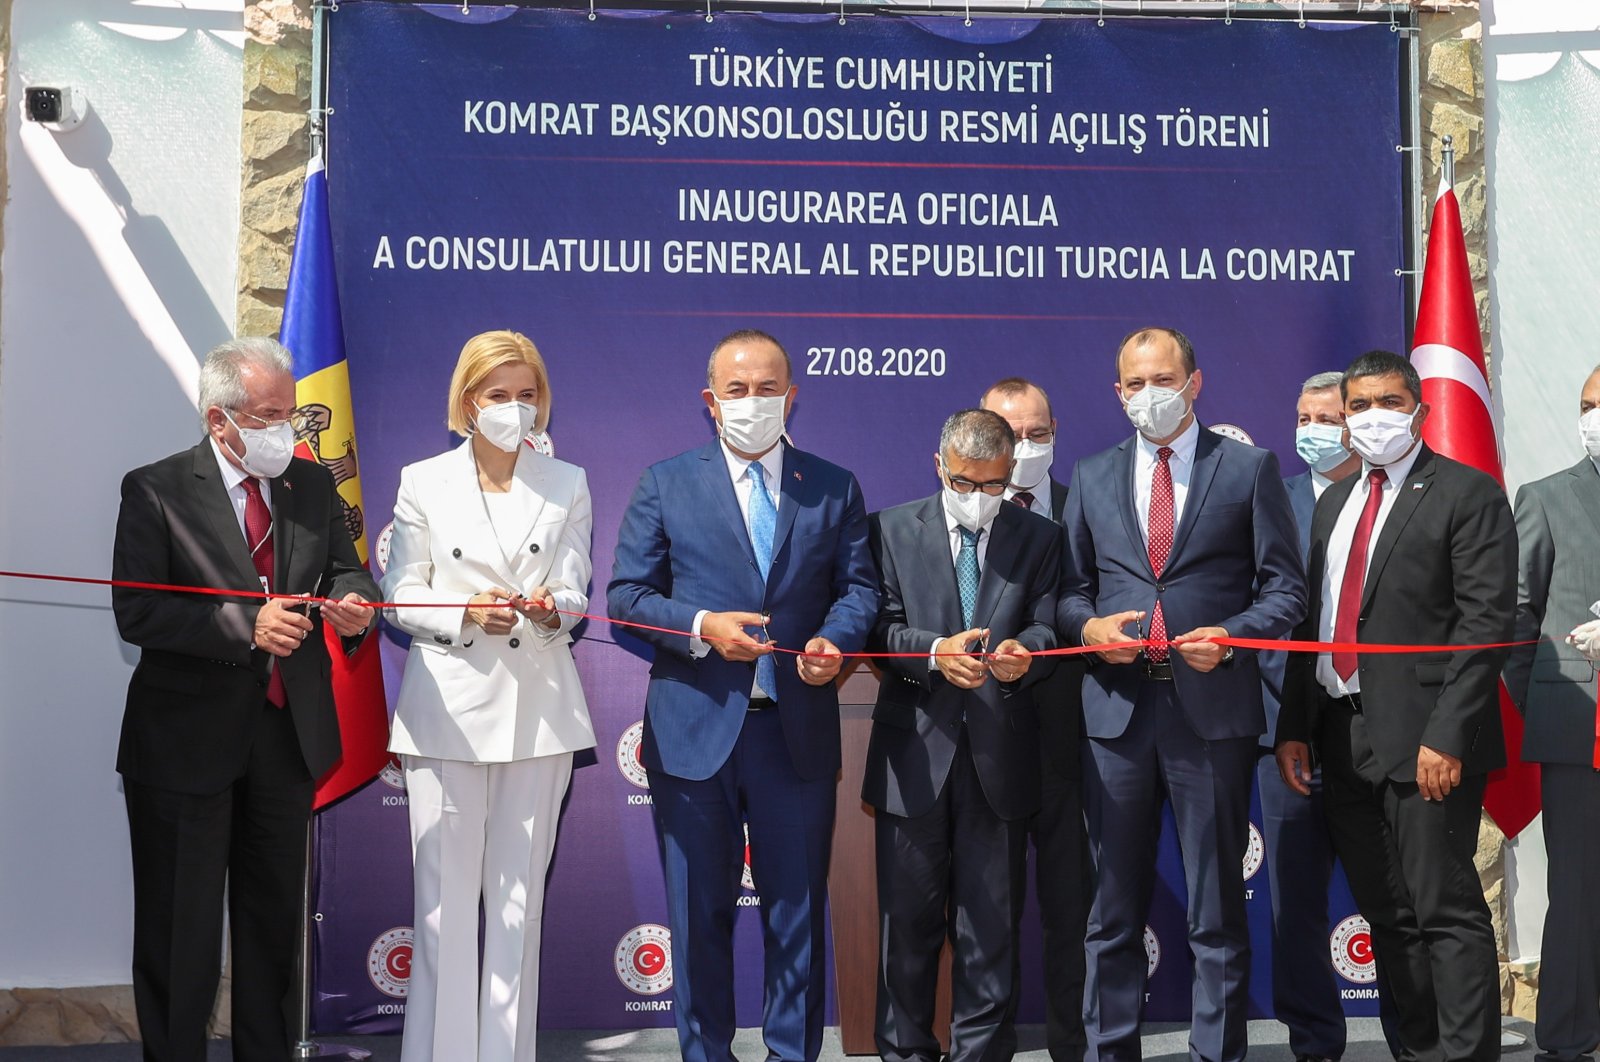 Foreign Minister Mevlüt Çavuşoğlu (3rd from left), inaugurates Turkey's consulate-general in Comrat, the capital of Moldova's Gagauzia autonomous region, along with his Moldovan counterpart Oleg Tsulya (2nd from right) and Gagauzia Gov. Irina Vlah (2nd from left), Aug. 27, 2020. (AA)